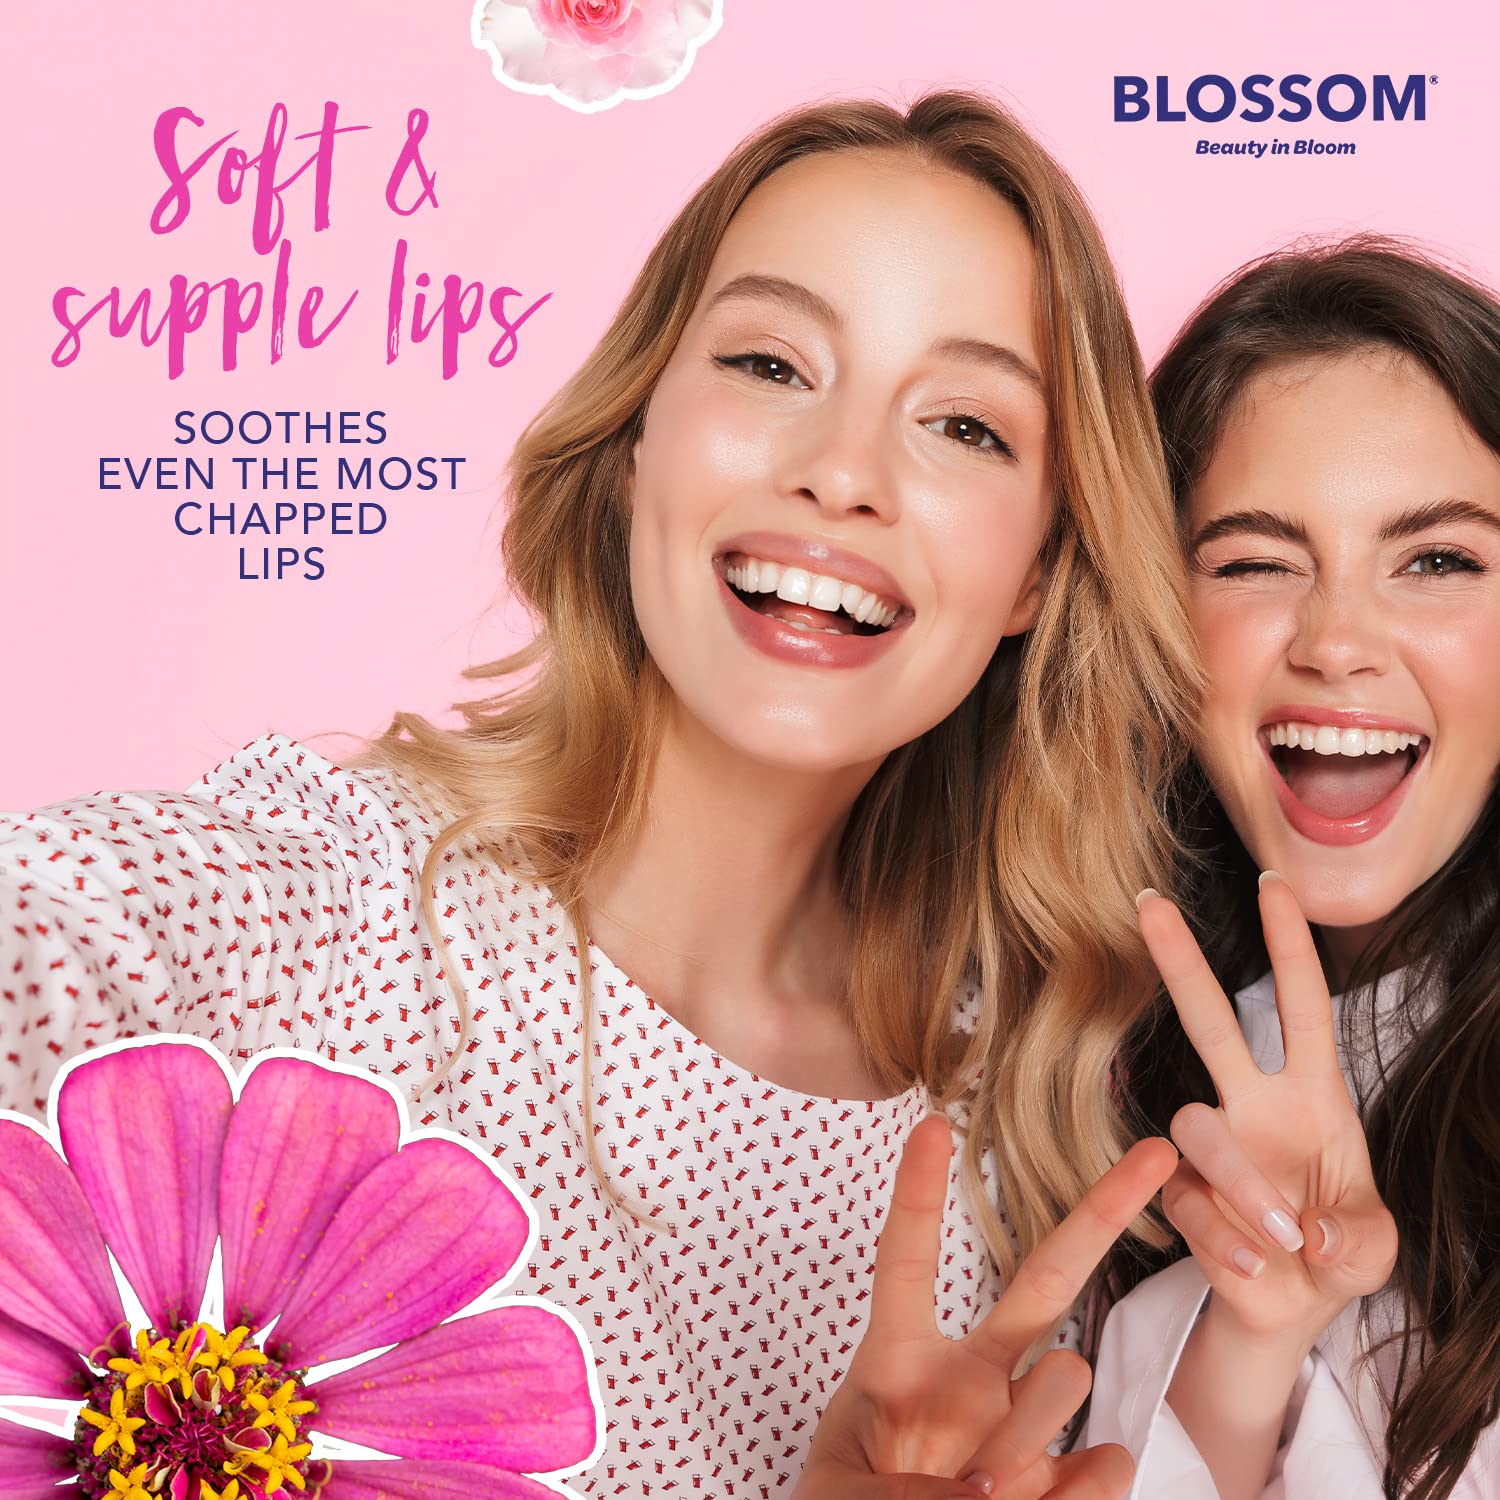 Blossom Scented Roll on Lip Gloss, Infused with Real Flowers, Made in USA, 0.40 fl oz, 2 pack, Raspberry/Watermelon